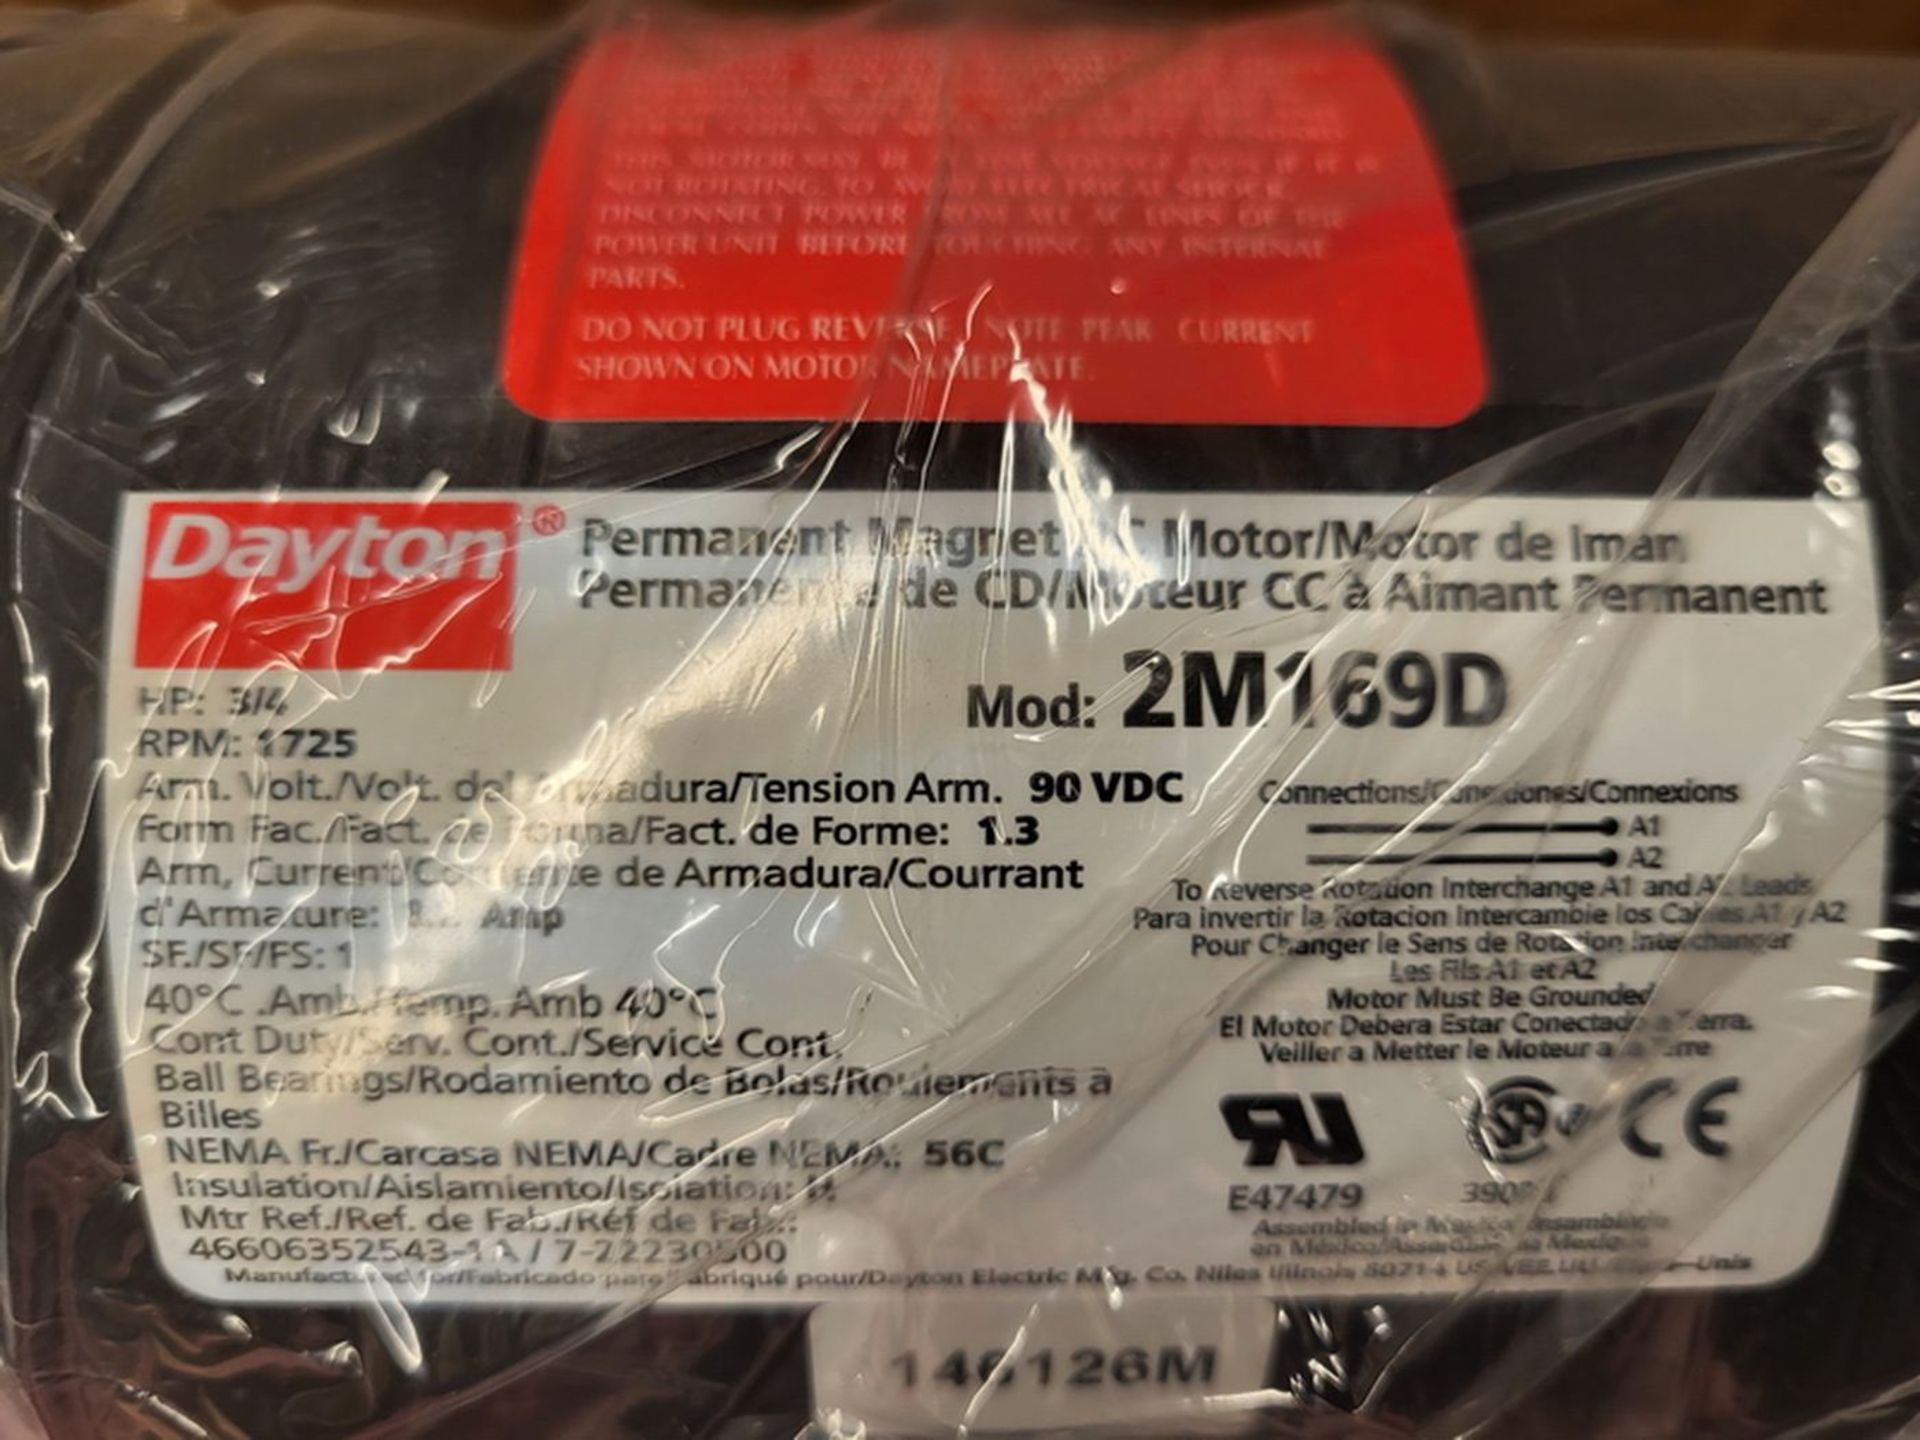 Dayton 2M169D DC, Permanent Magnet Motor, 3/4-HP, 1725 RPM (New in Box) - Image 2 of 3